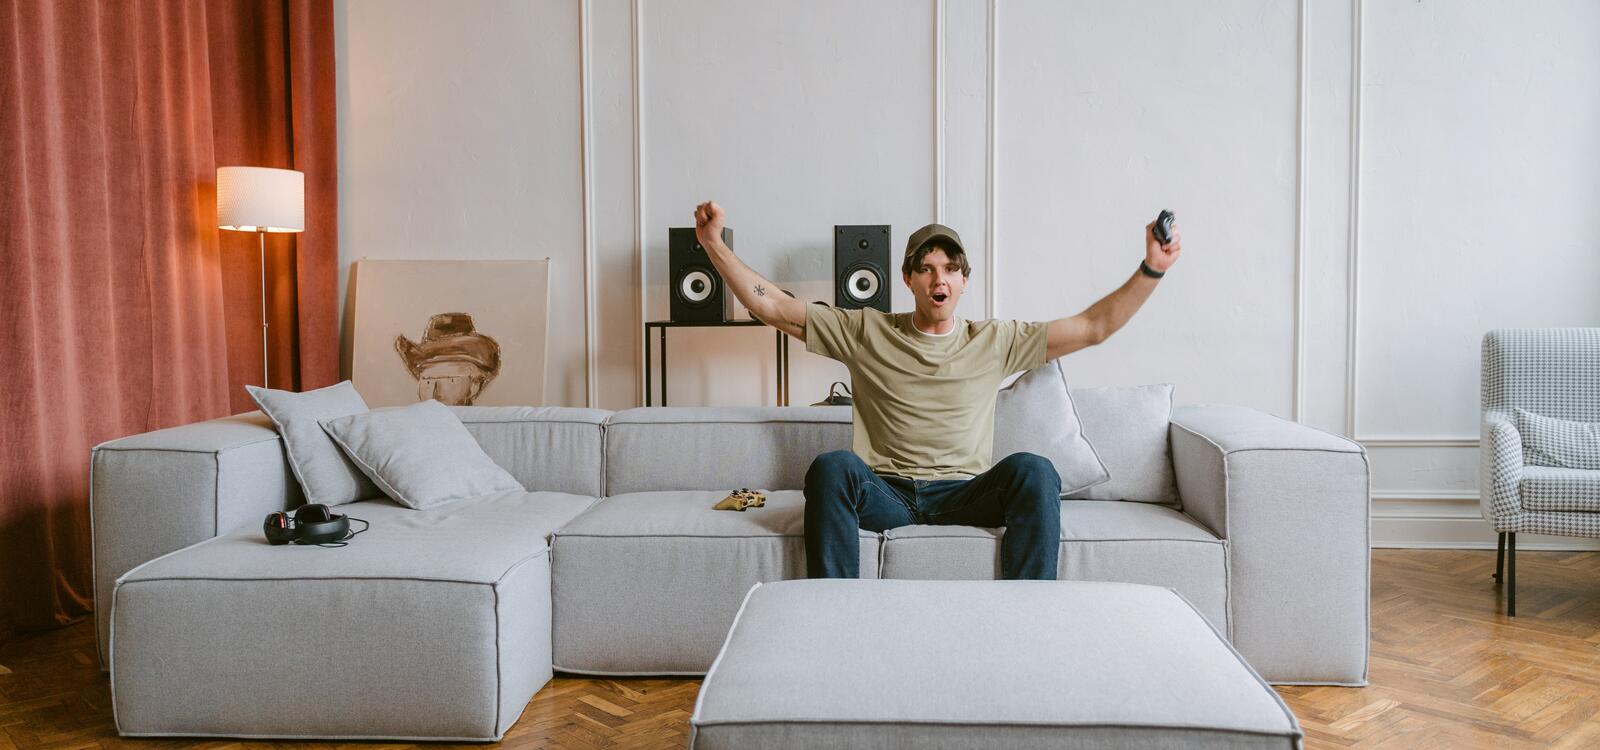 Man sitting on couch holding arms up in victory with a video game controller in hand